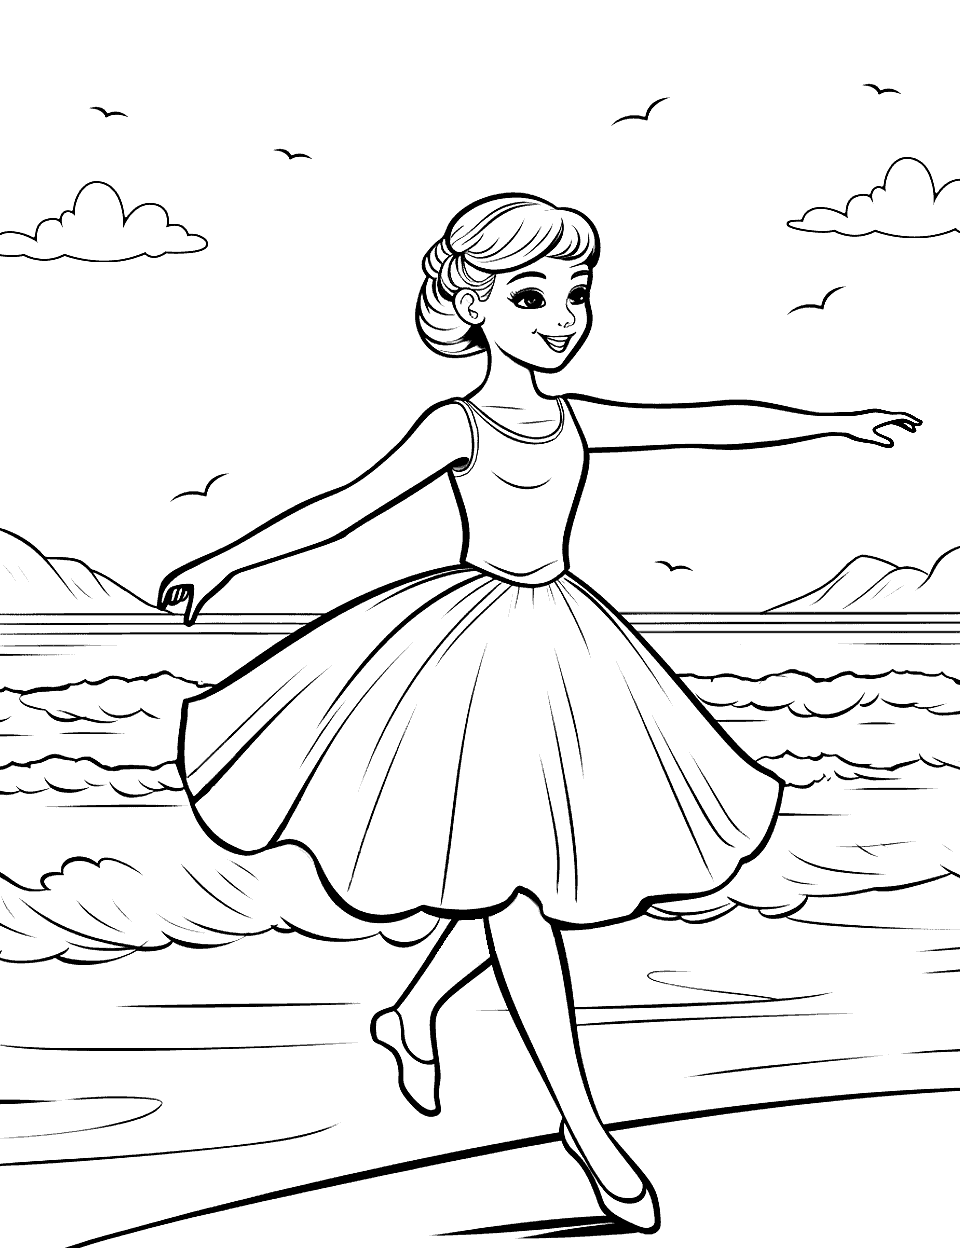 Seaside Ballet Ballerina Coloring Page - A ballerina dancing on the beach, with waves in the background.